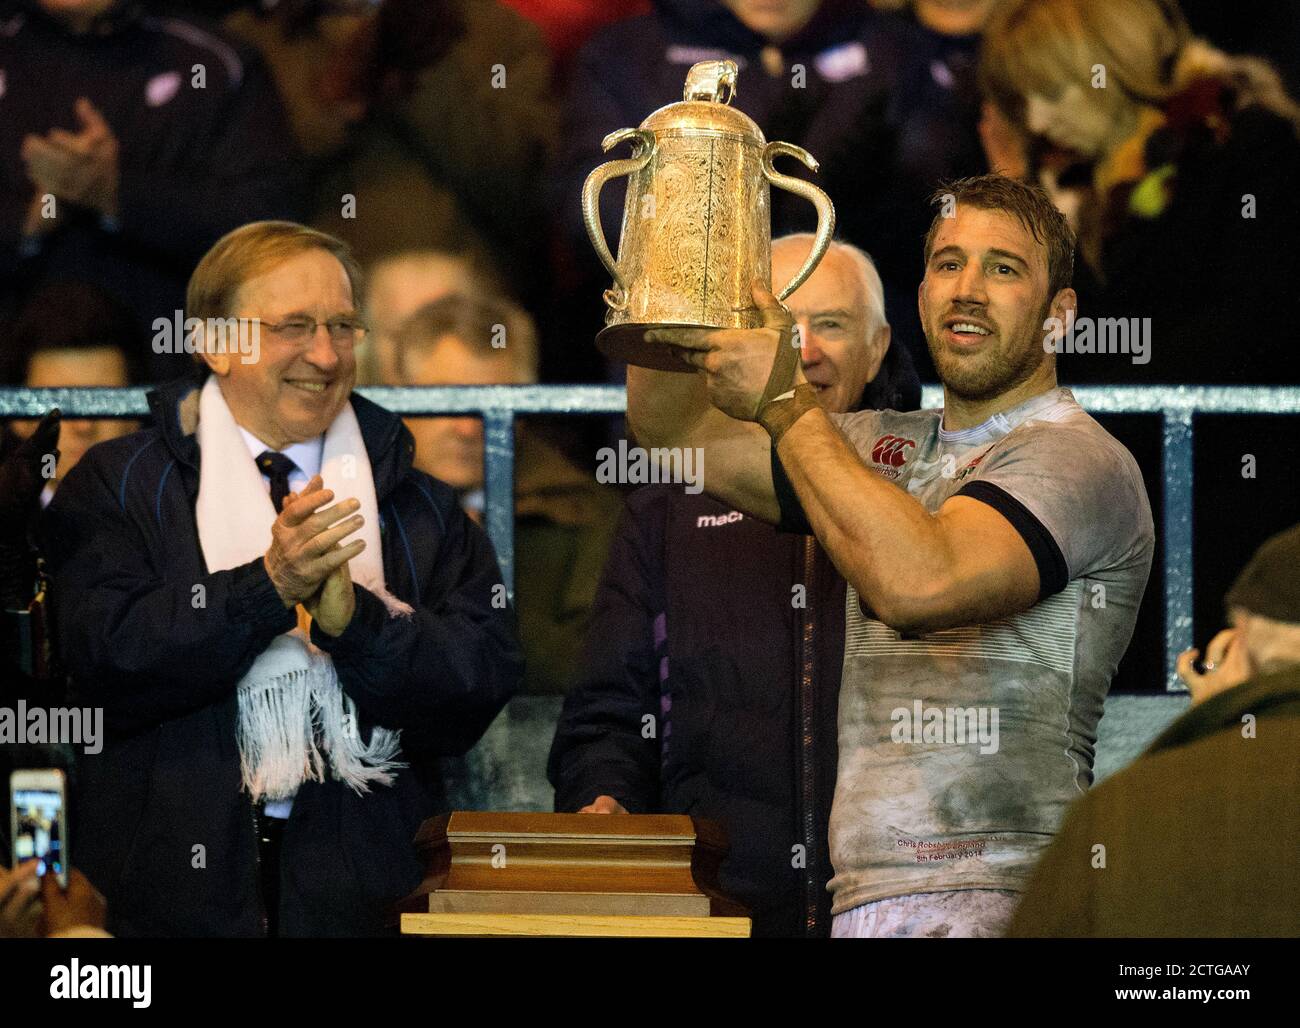 CHRIS ROBSHAW LIFTS THE CALCUTTA CUP AFTER A CONVINCING 20-0 VICTORY. SCOTLAND v ENGLAND, SIX NATIONS CHAMPIONSHIP, MURRAYFIELD. Picture :© MARK PAIN Stock Photo